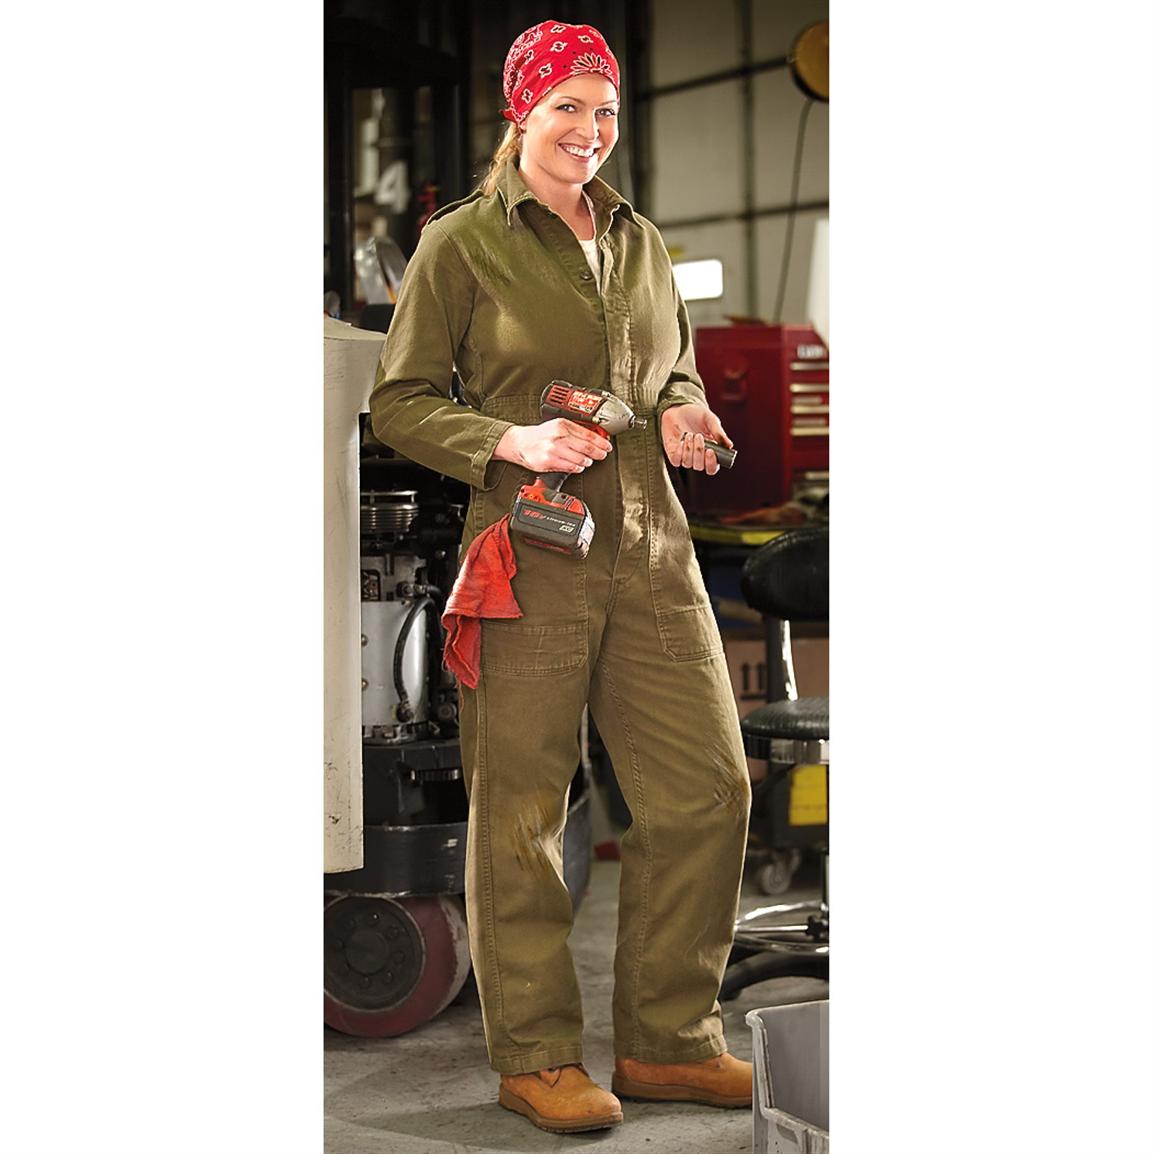 Used Dutch Mechanic's Coveralls, Olive Drab